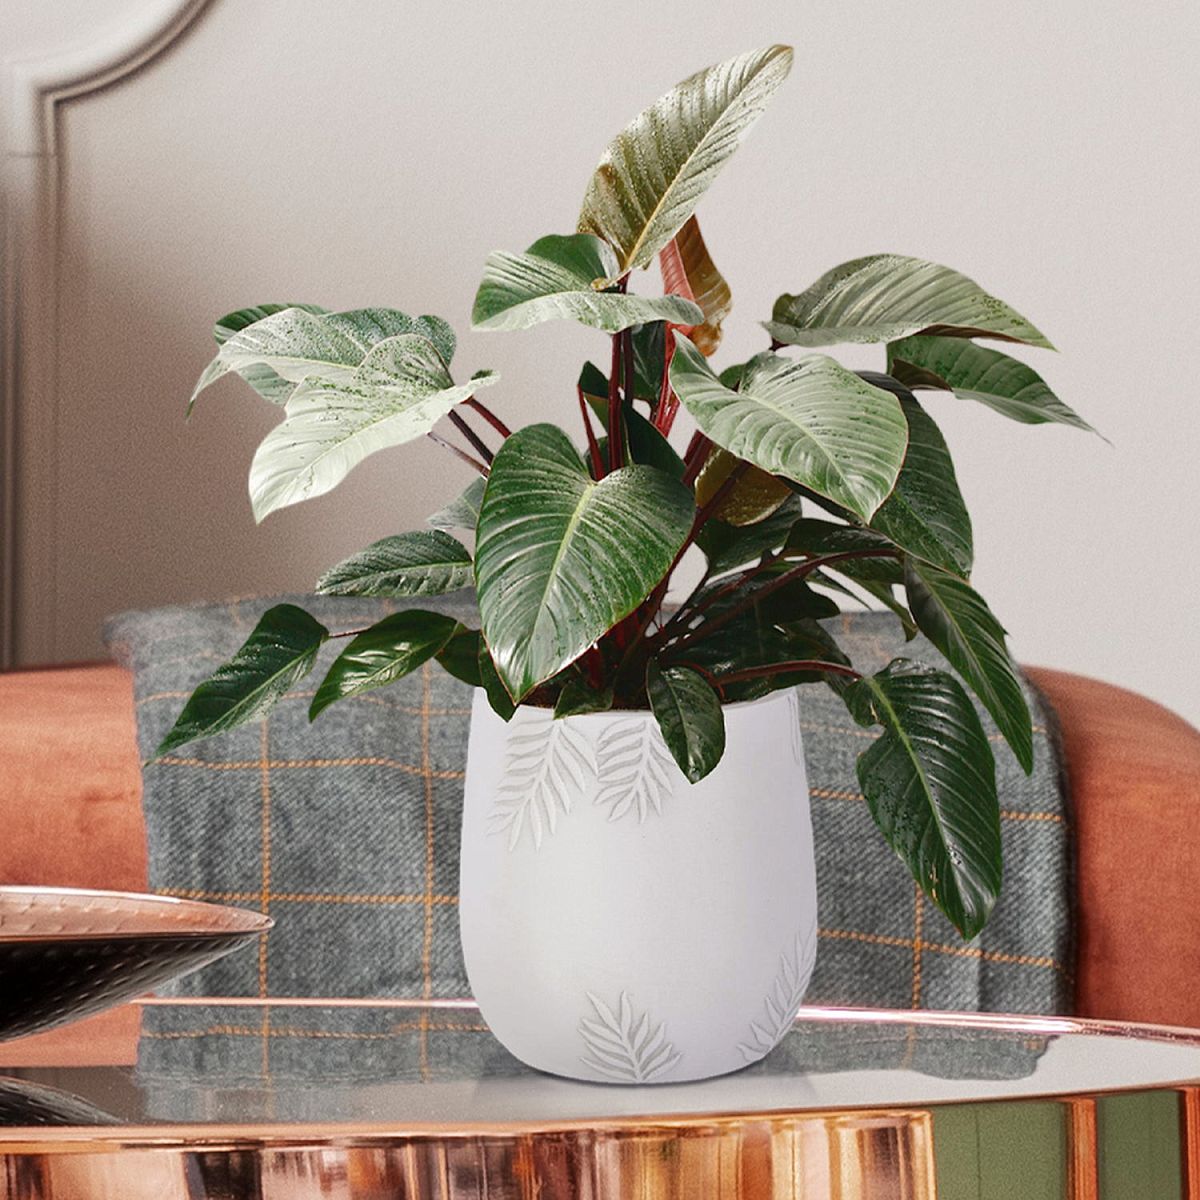 Leaf Embossed Table and Hanging Plant Pot Dual Use Indoor Egg Planter by Idealist Lite